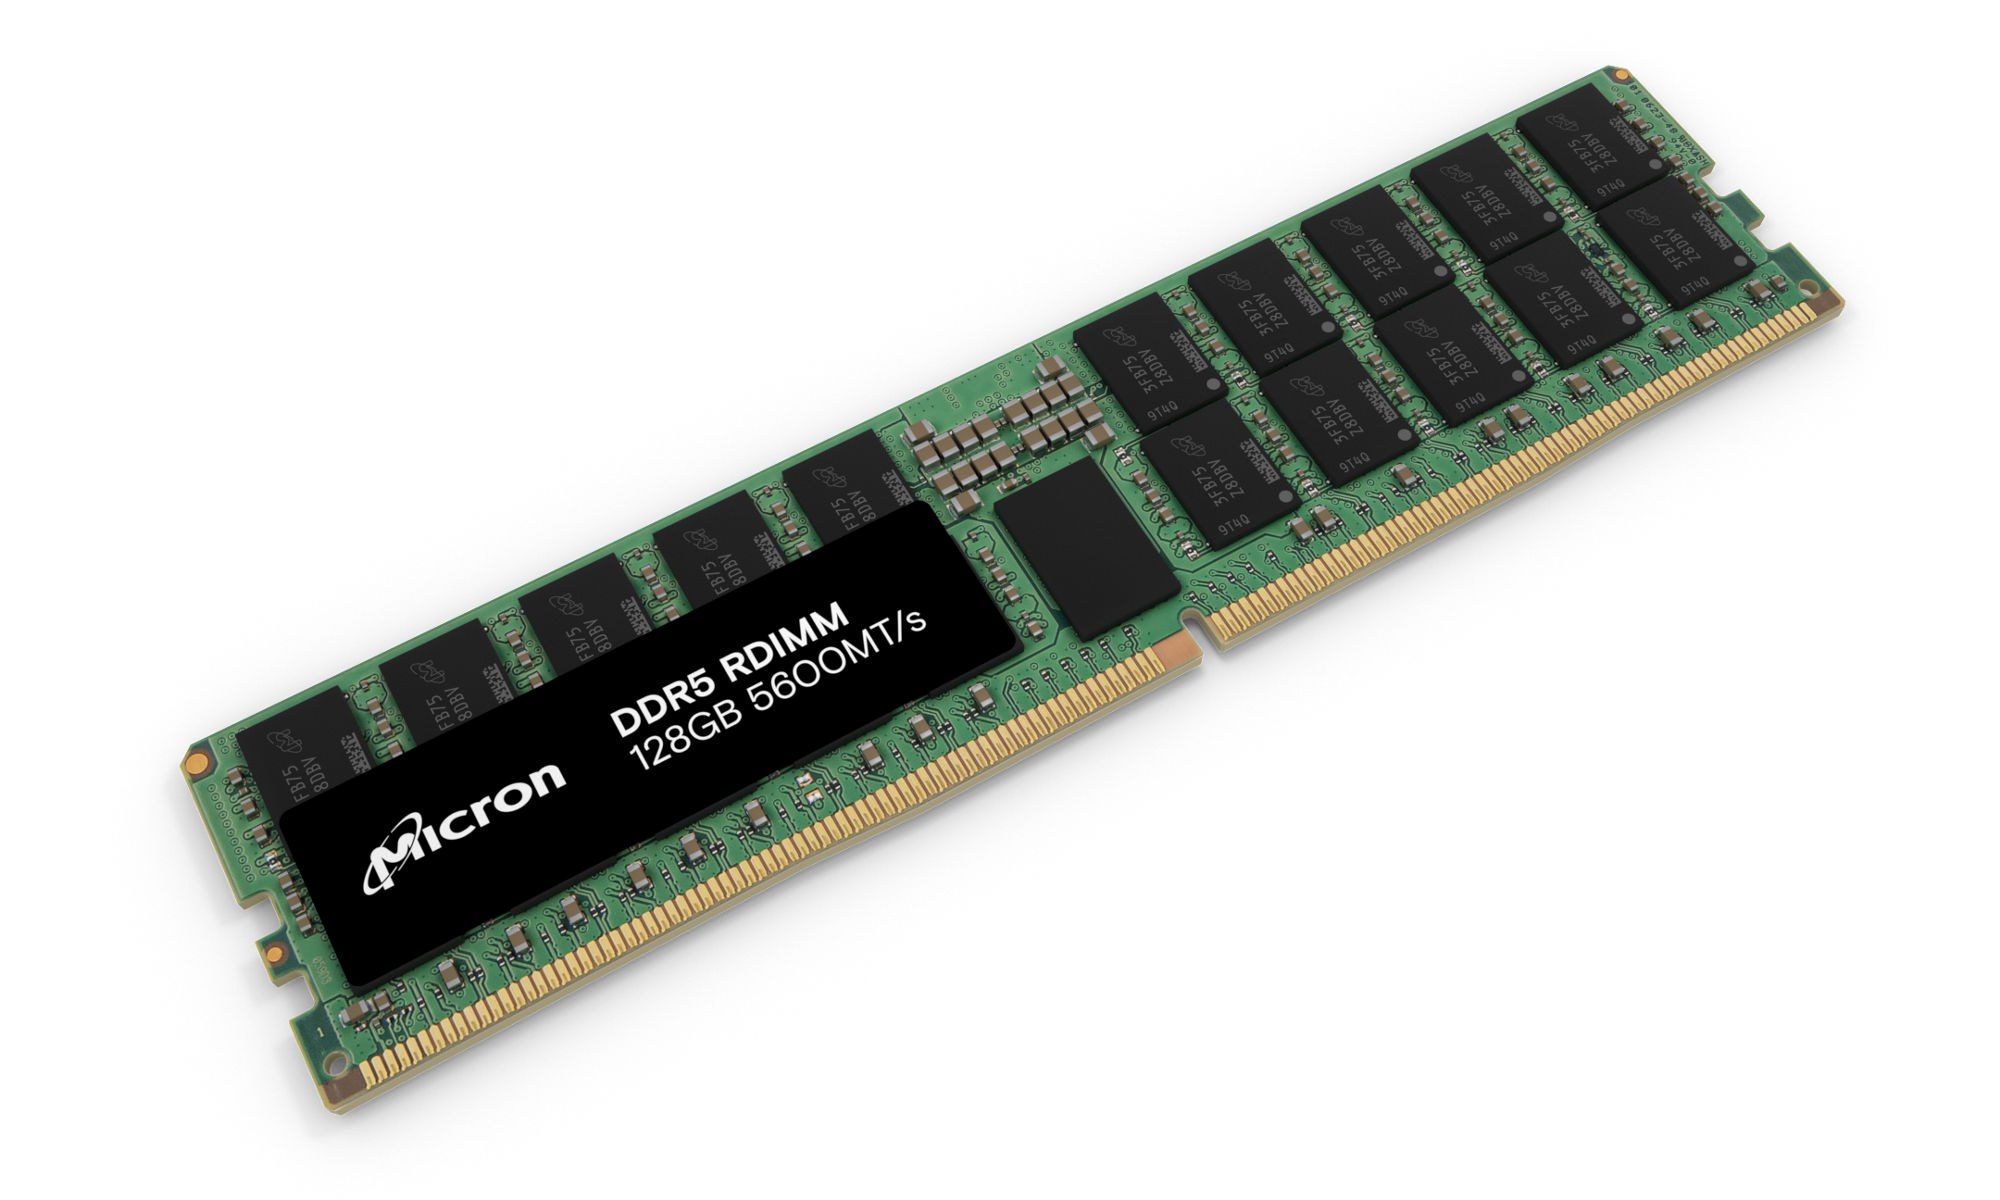 Micron DDR5 RDIMM 96GB and 128GB modules side by side